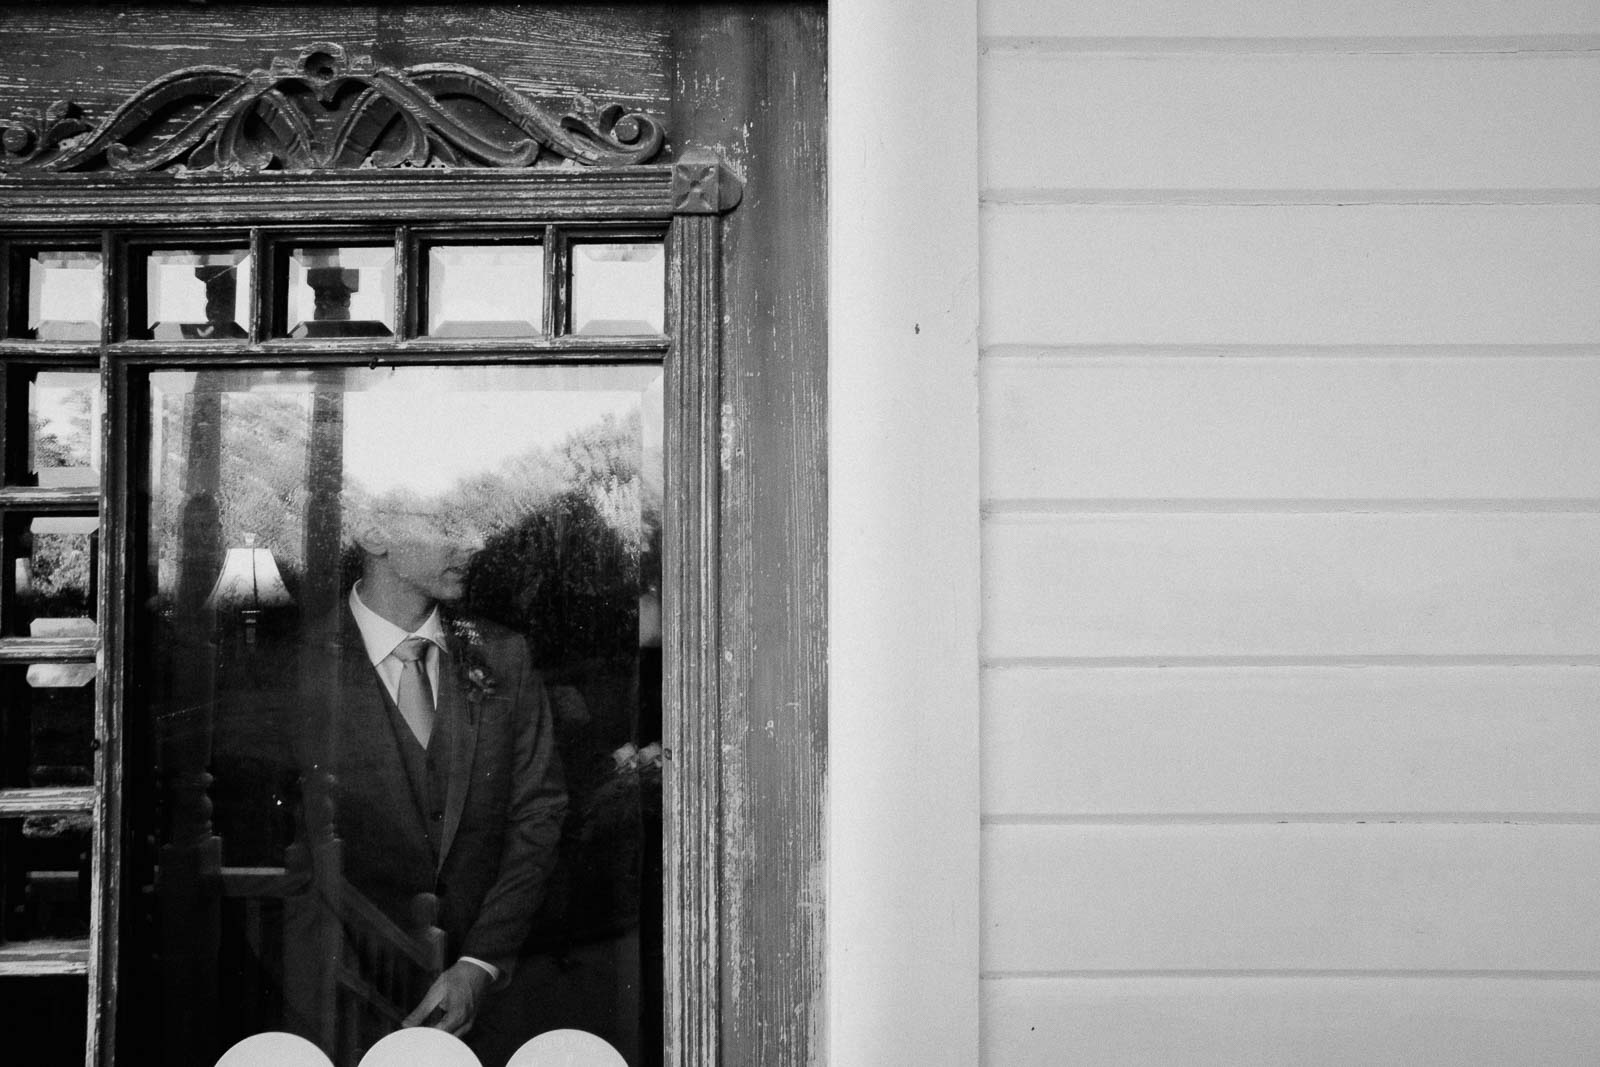 The groom stands at a window and is slightly obscured